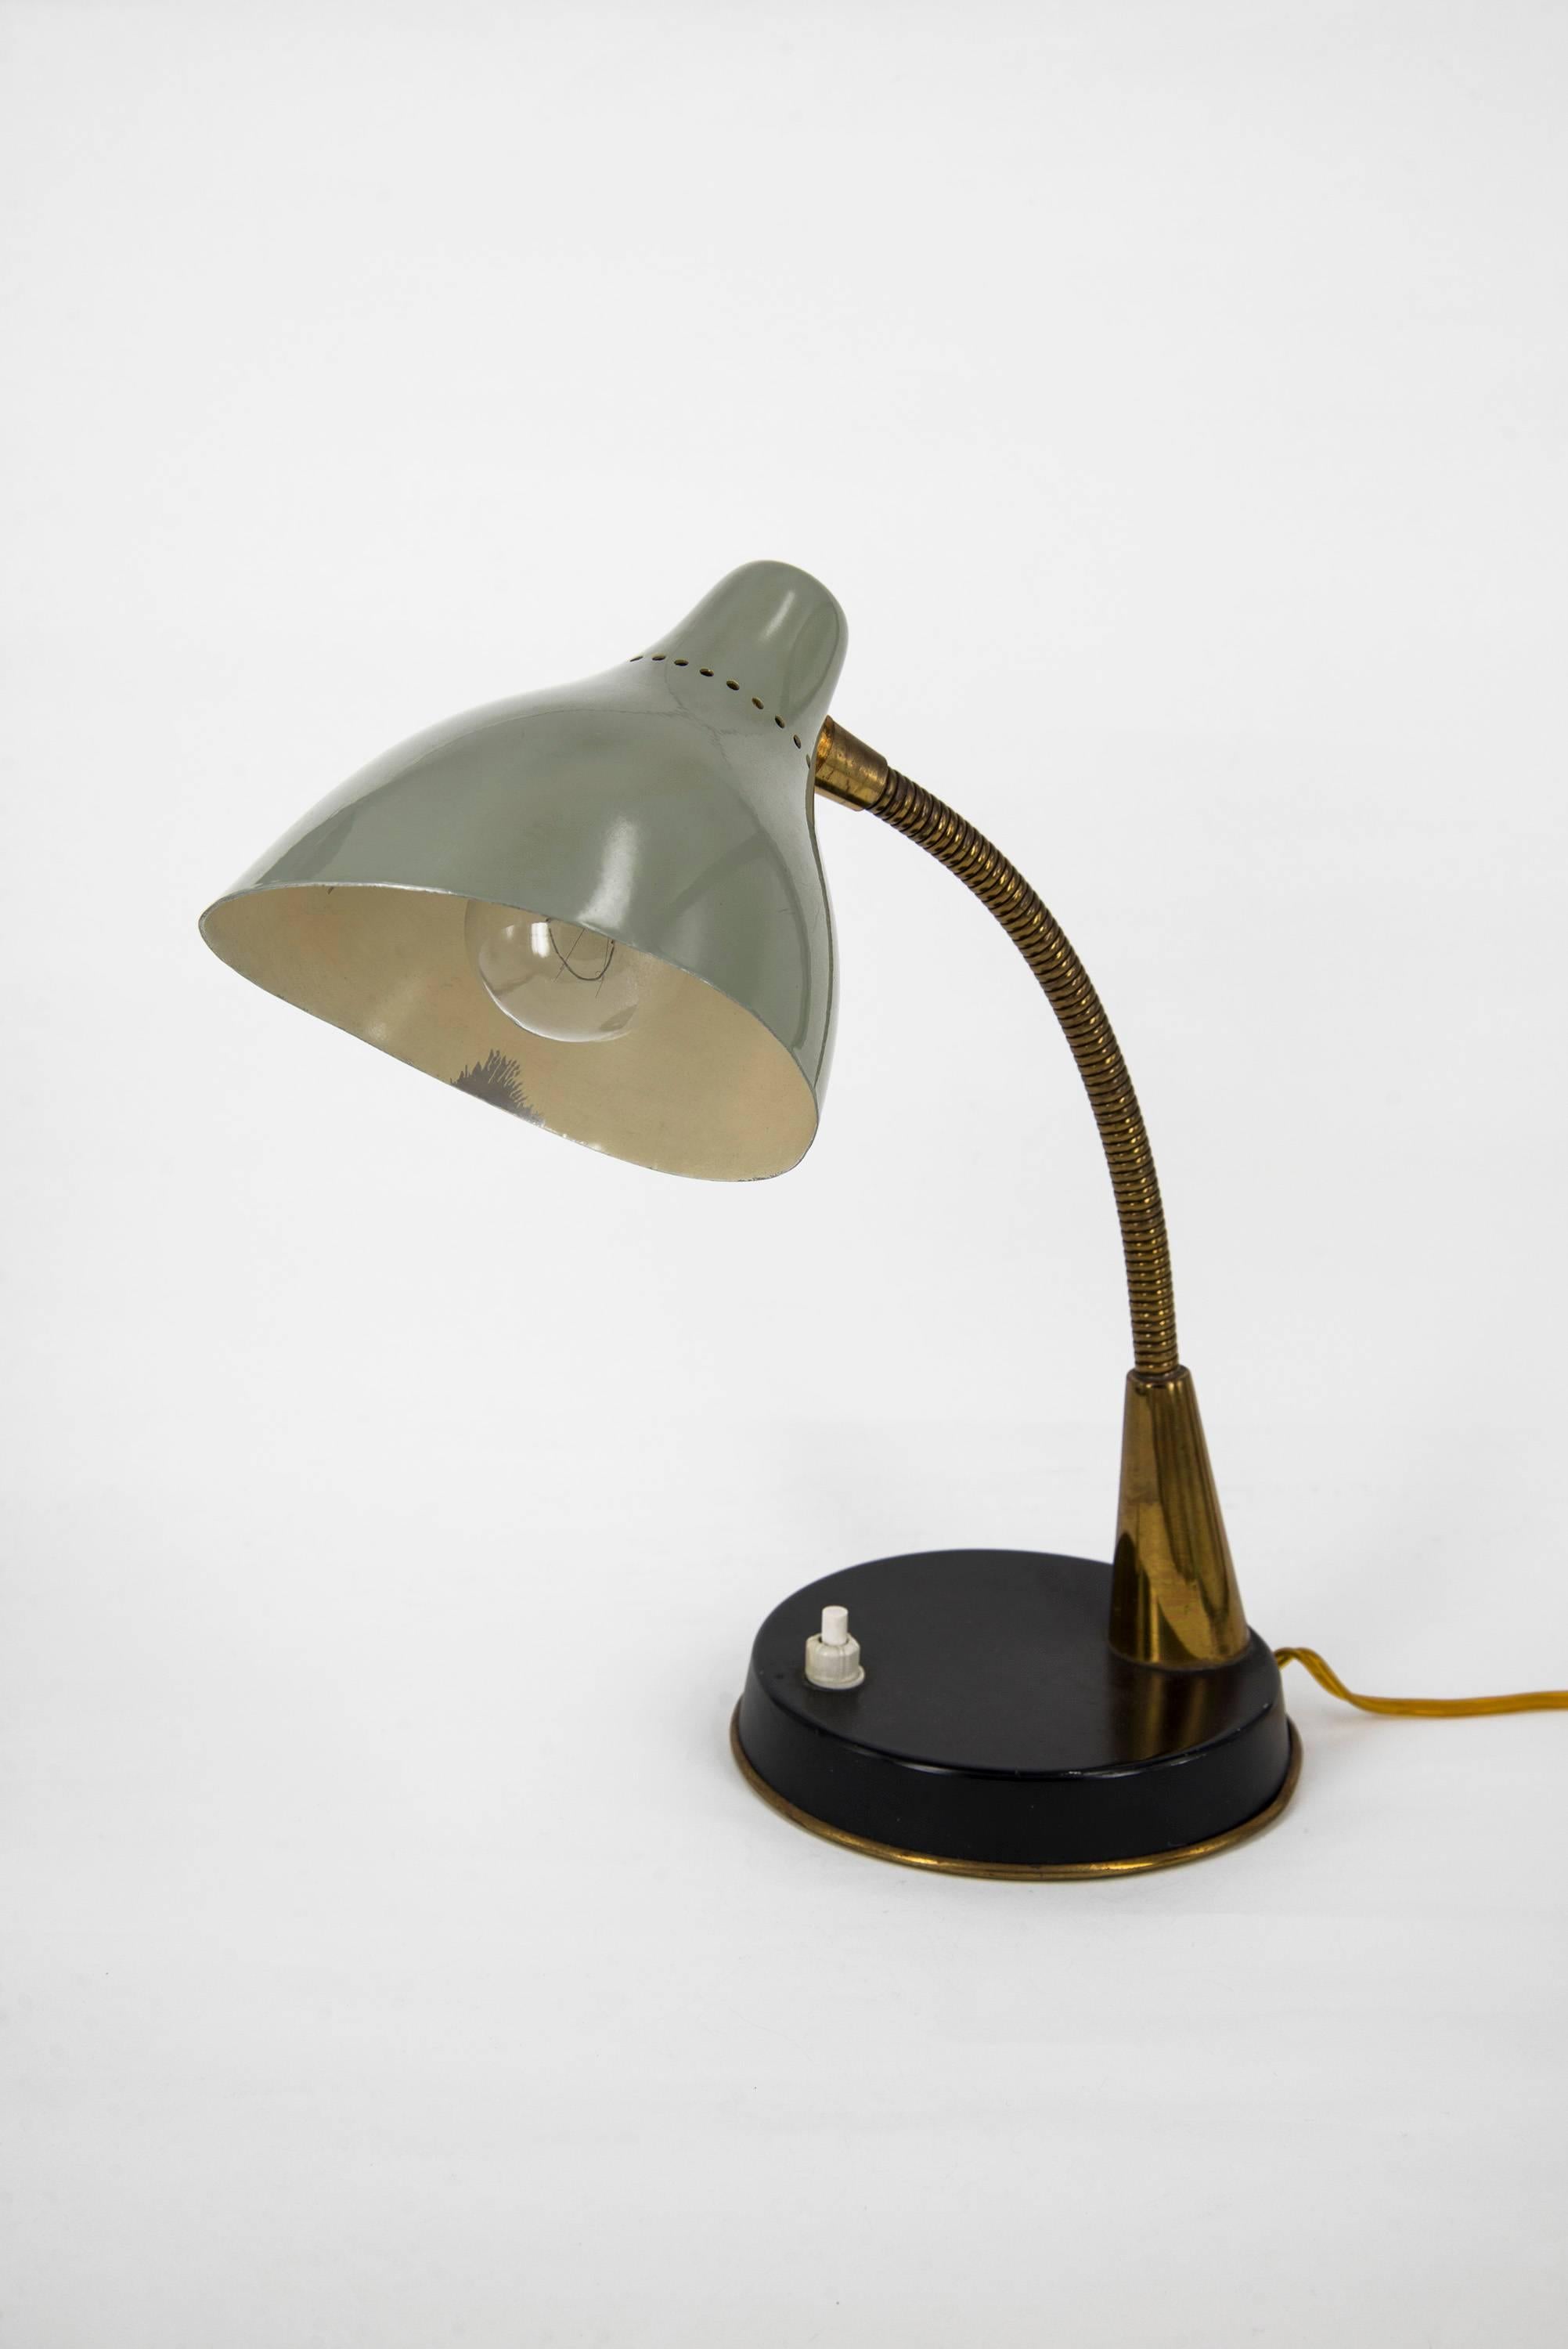 Flexible and adjustable pair of table lamps manufactured by Oluce in the 1950s. Lacquered metal bases, flexible brass stem, lacquered metal diffusers. Good original vintage conditions.